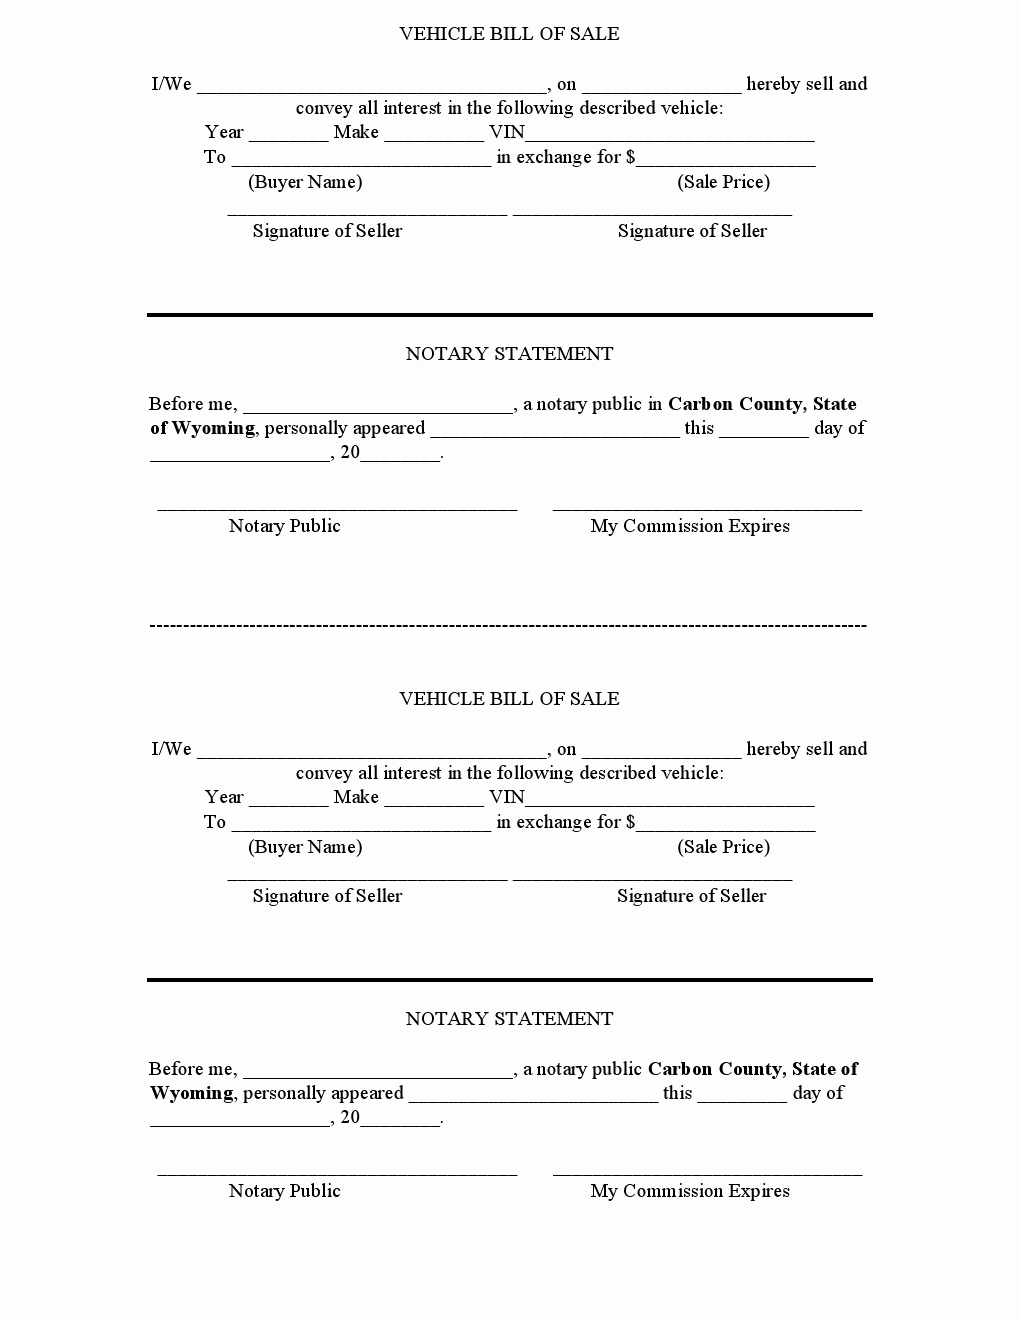 Bill Of Sale Car Georgia Beautiful Free Carbon Country Vehicle Bill Of Sale form Download